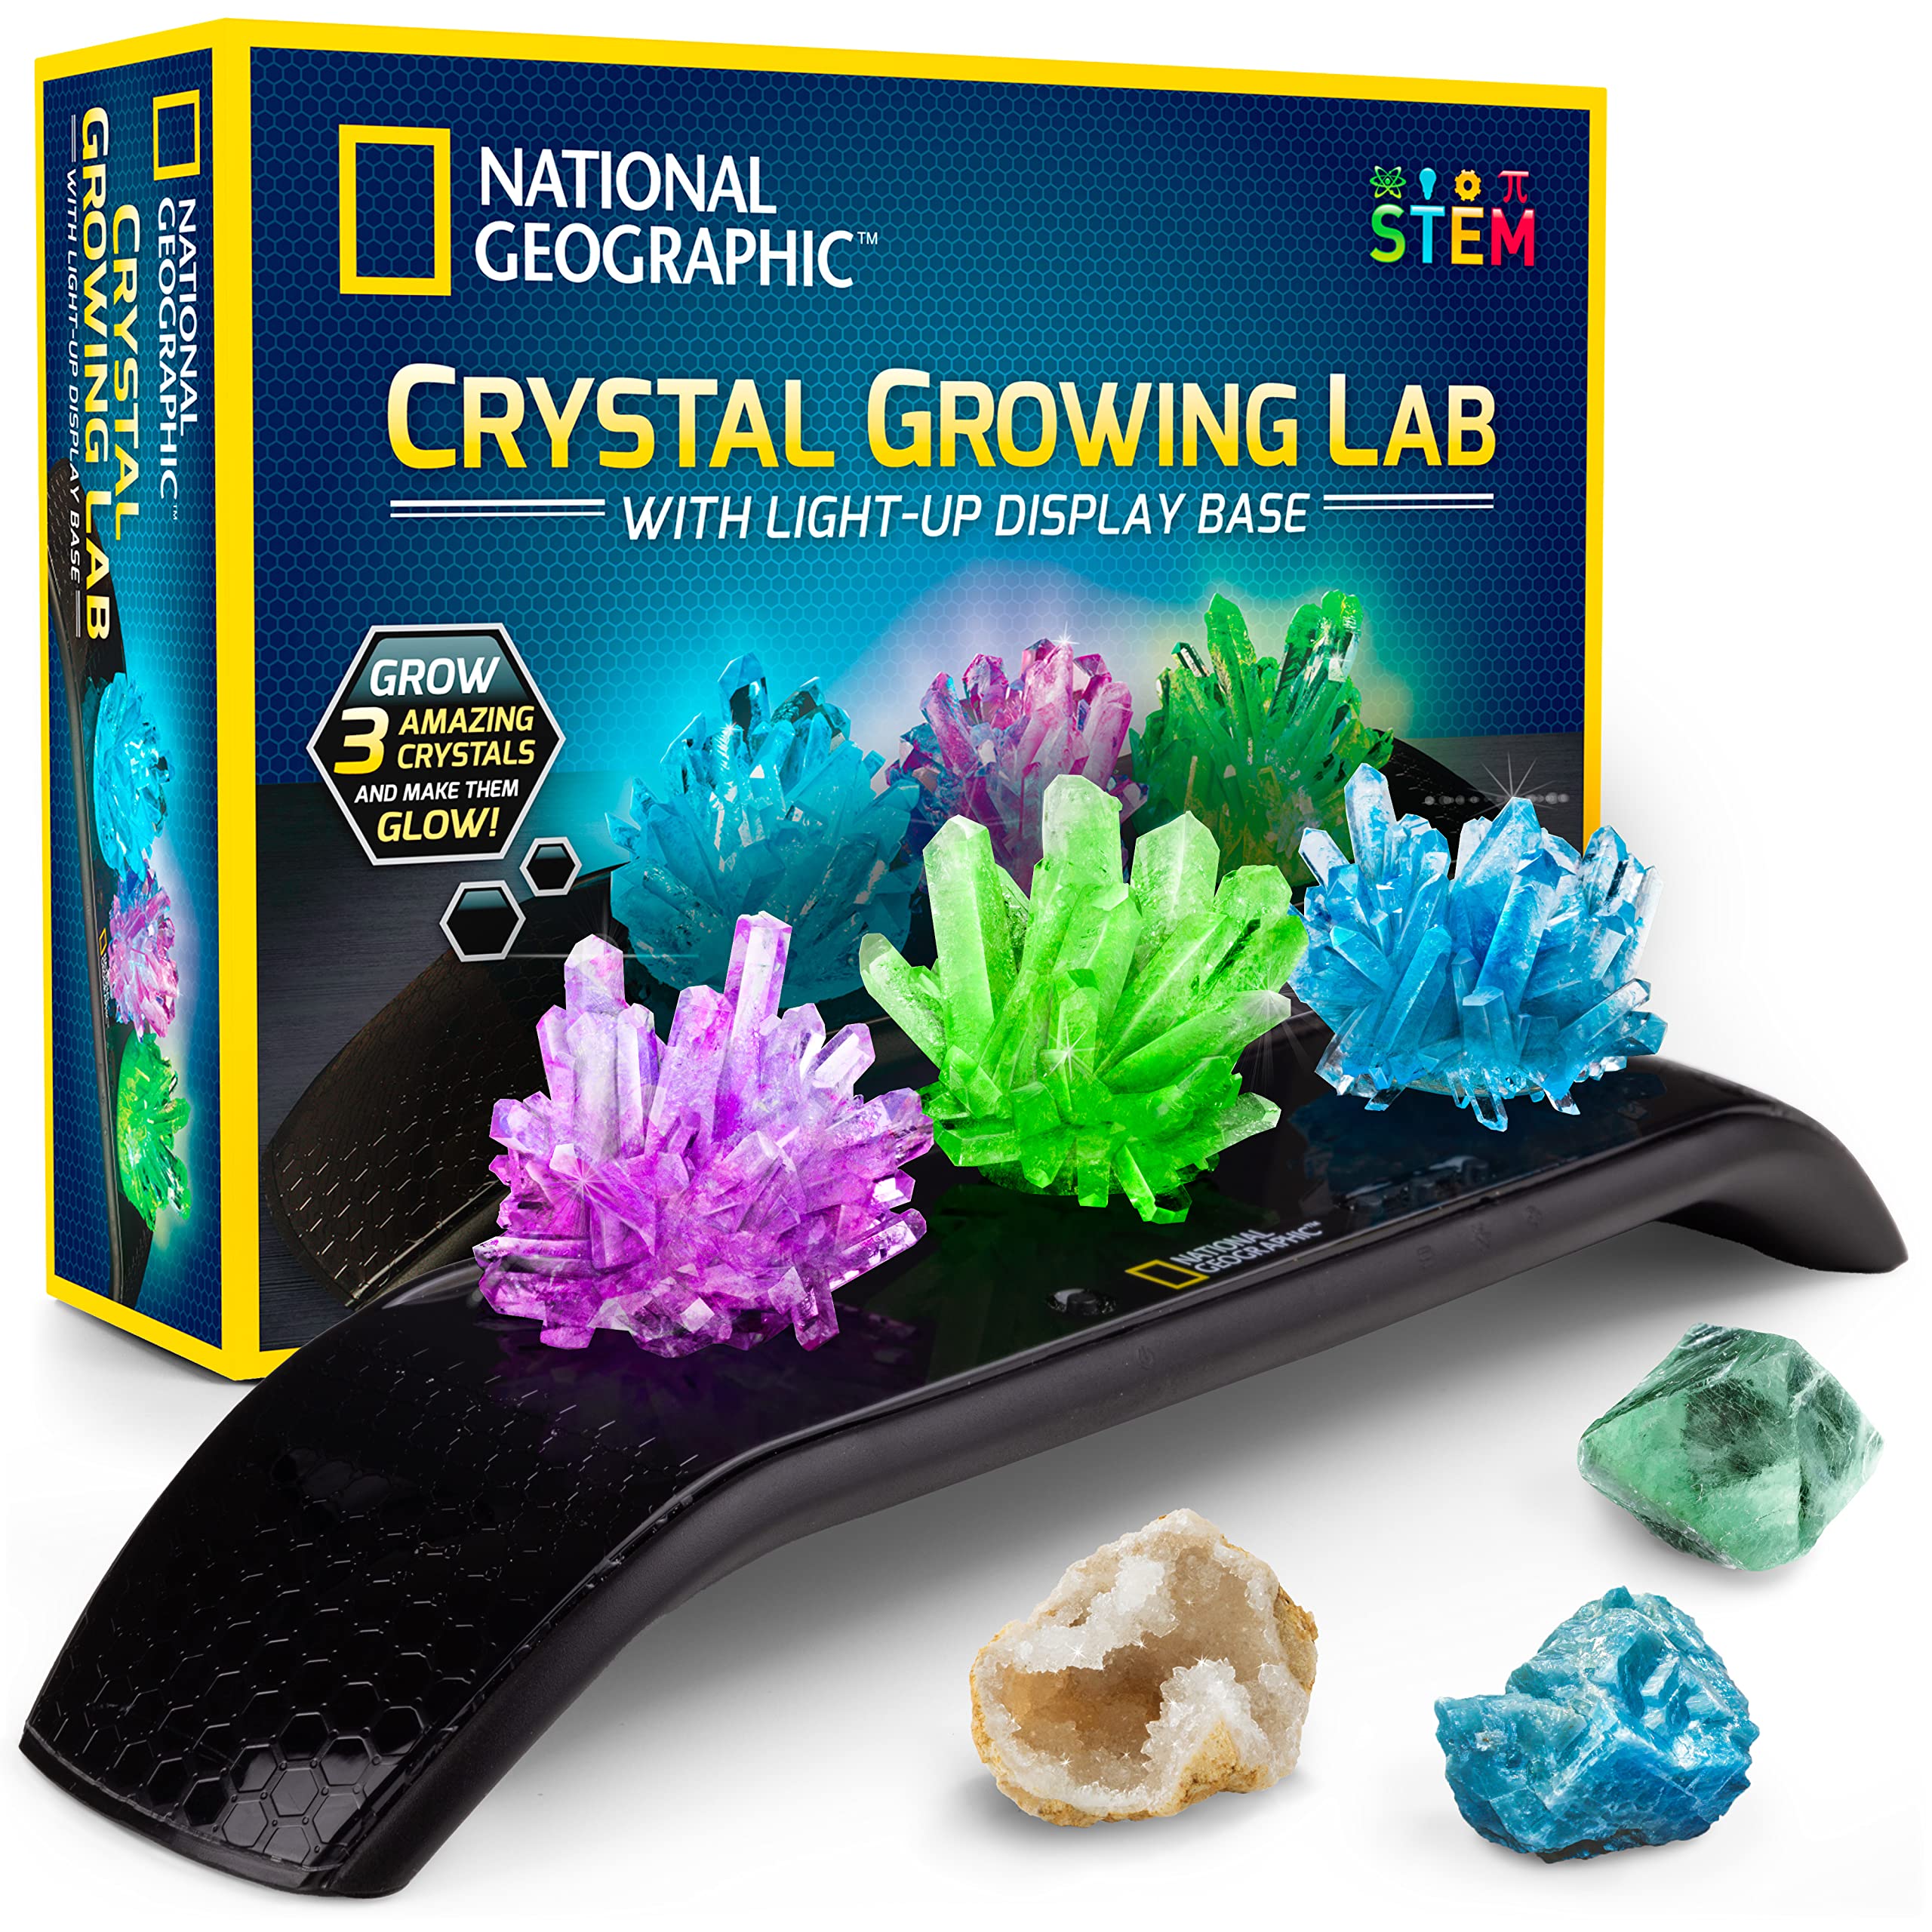 NATIONAL GEOGRAPHIC Crystal Growing Kit - 3 Vibrant Colored Crystals to Grow with Light-Up Display Stand, Science Toy for Girls and Boys Ages 8-12, Includes 3 Gems, Cool STEM Gift (Amazon Exclusive)